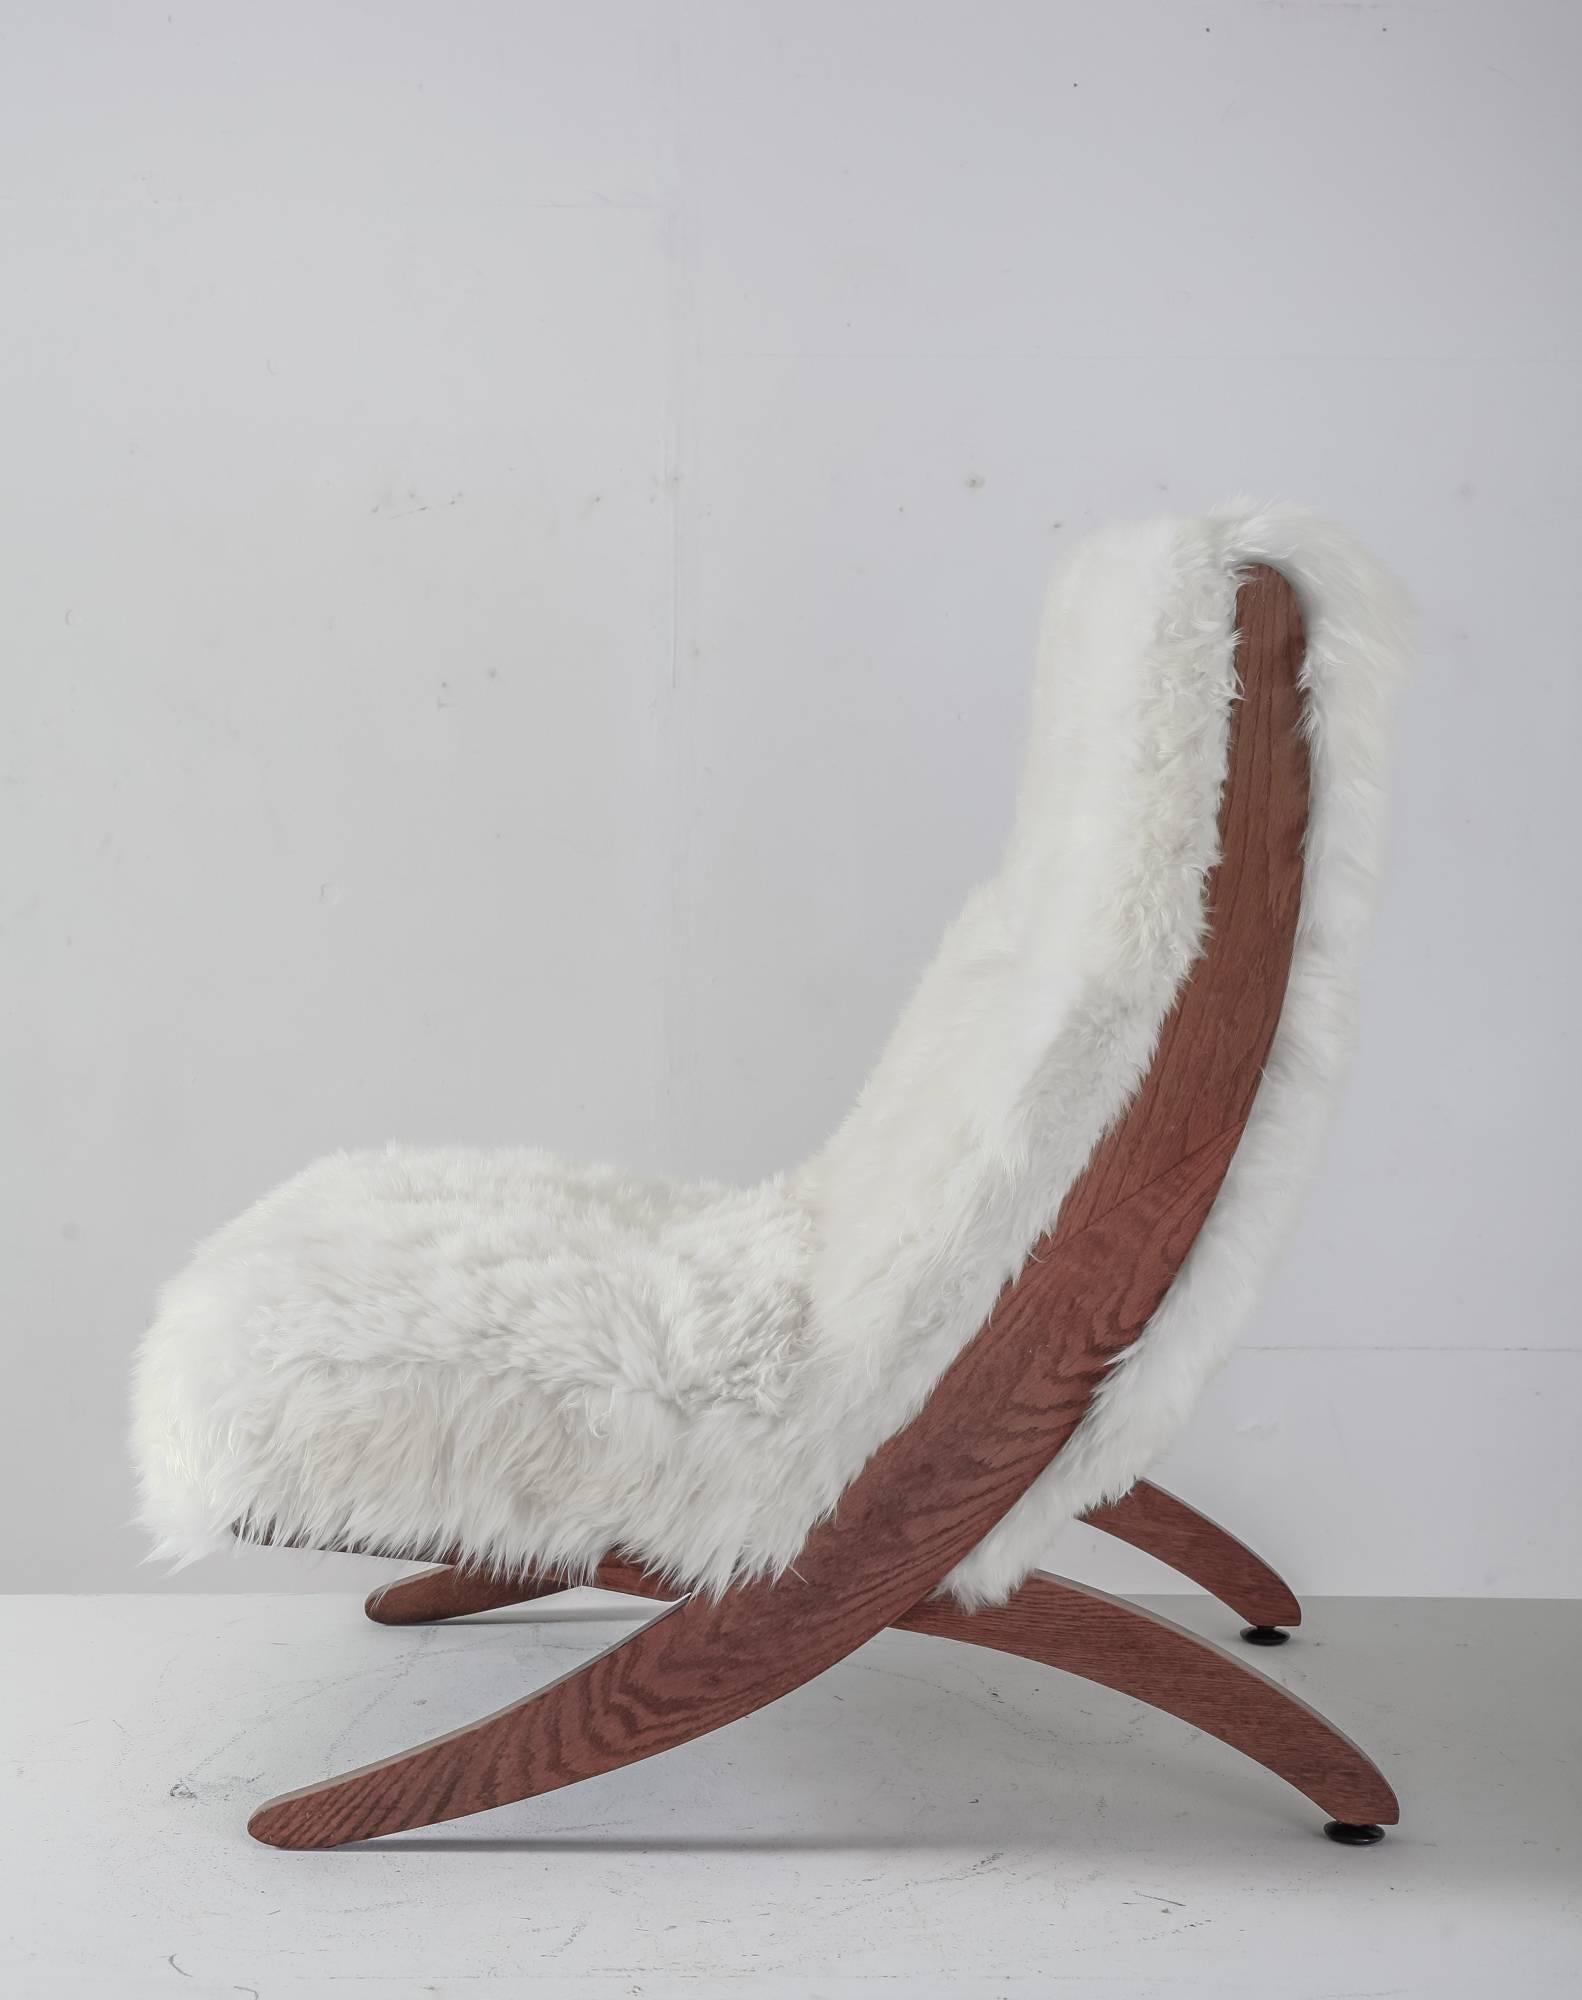 A 1950s oak lounge chair consisting of two interlocking pieces. The back legs stand on small metal feet. This chair was professionally reupholstered with a double layered white sheepskin.

An unique and very comfortable chair in a great condition.